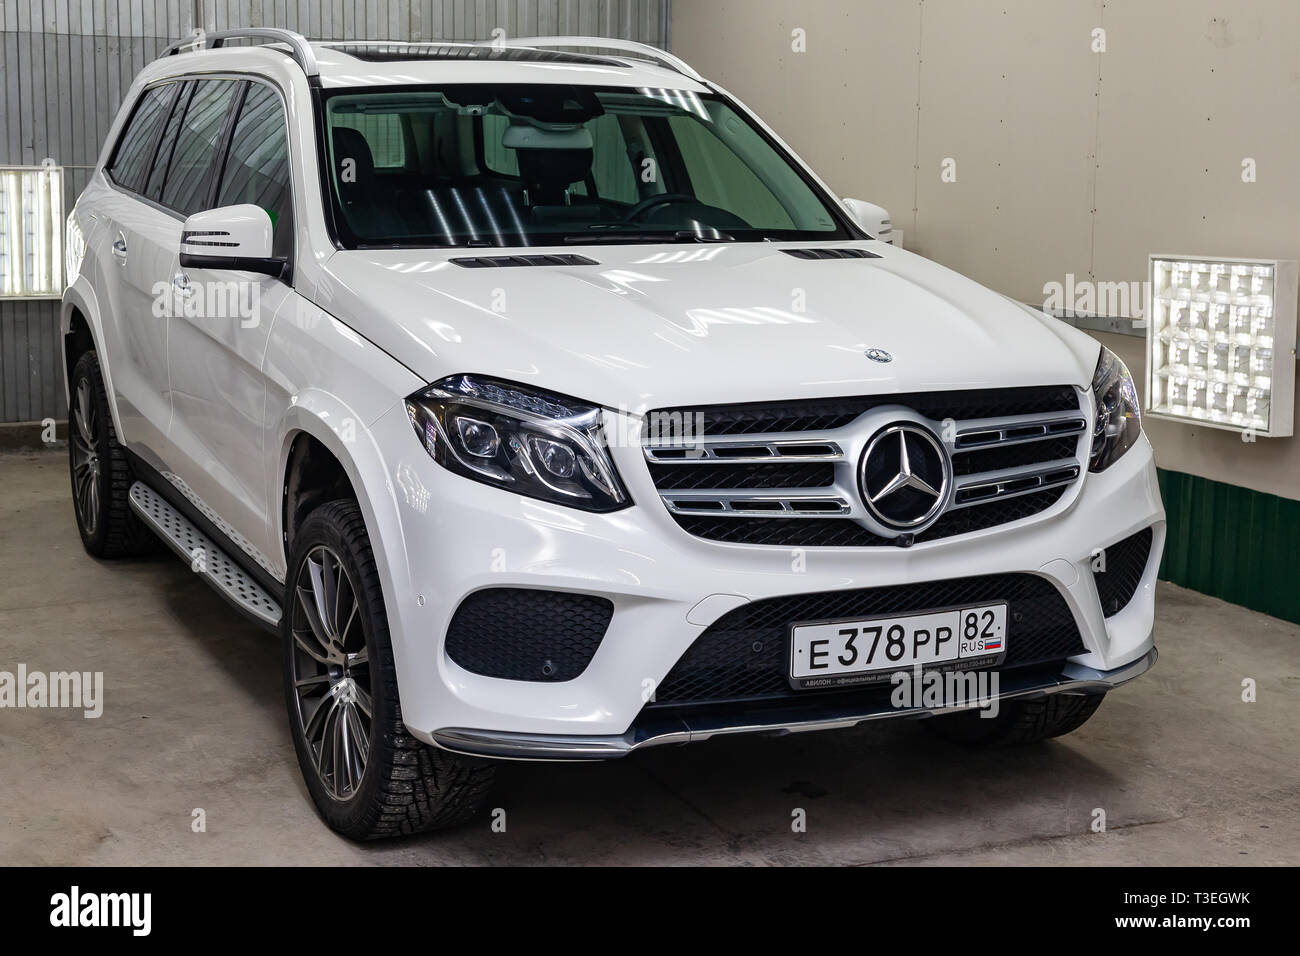 Novosibirsk, Russia - 08.01.18: Front view of luxury very expensive new white Mercedes-Benz GLS 350d car stands in the washing box waiting for repair  Stock Photo